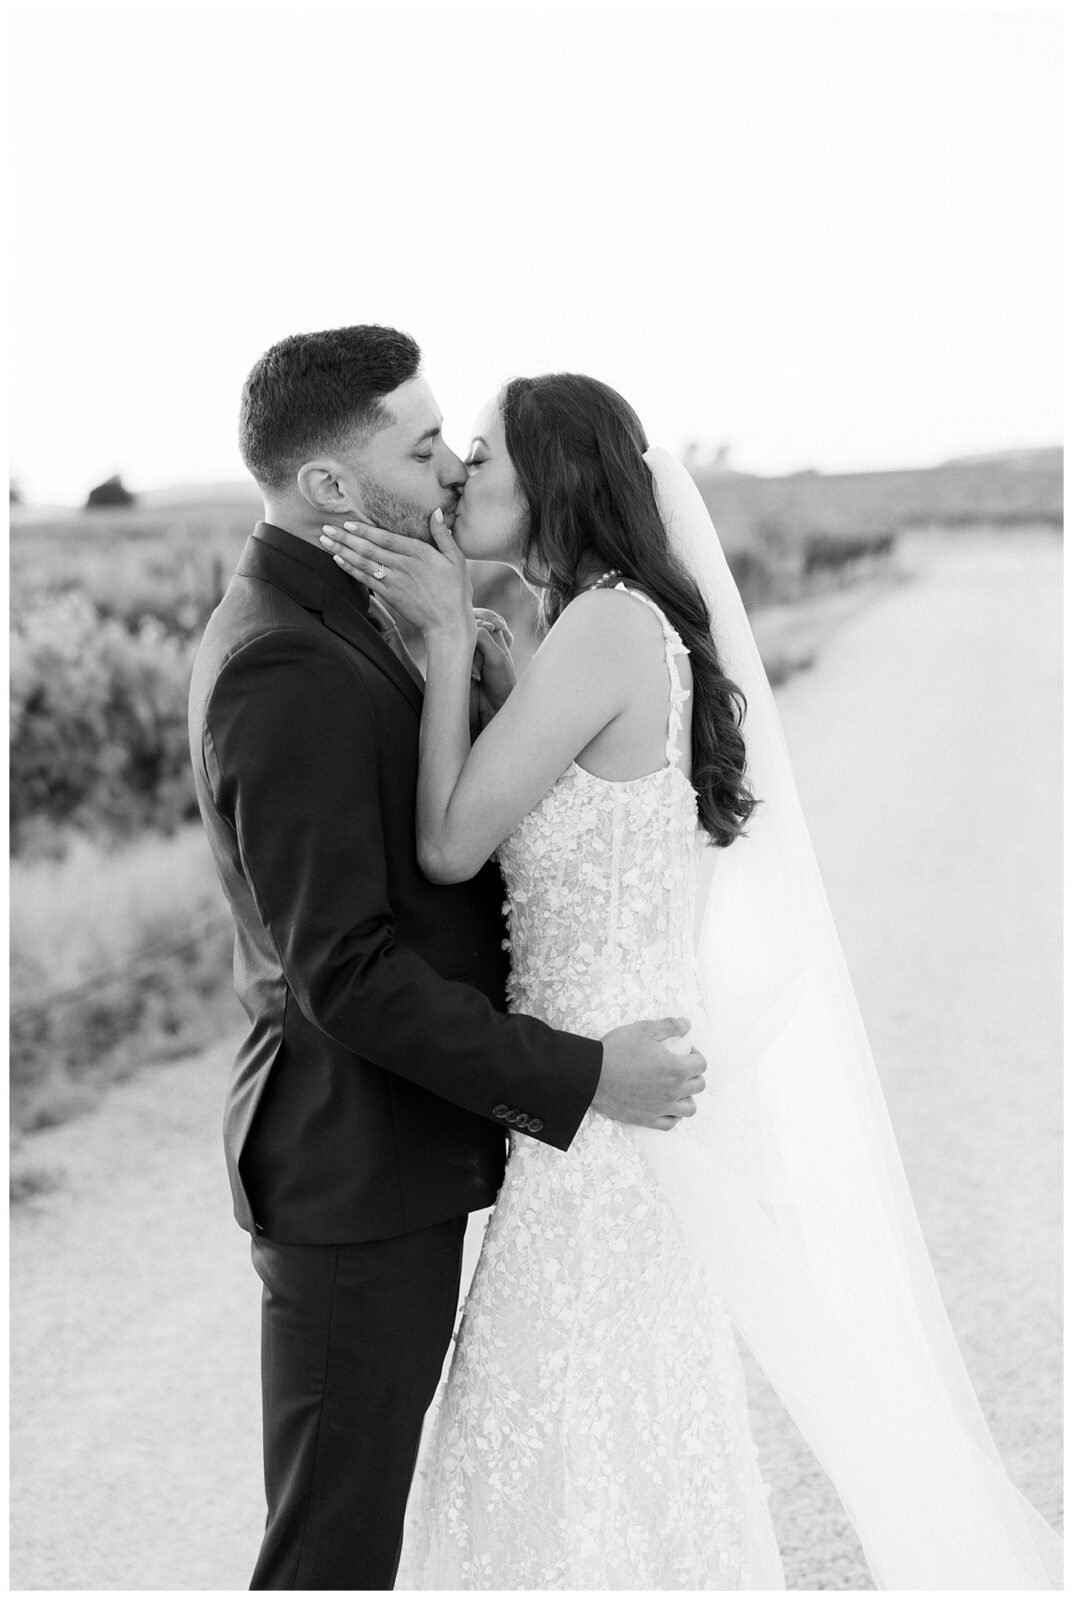 Bree and Groom passionately kiss in the vineyards during their Bella TERRA vineyards wedding day a beautiful outdoor garden wedding venue in Paso Robles California.